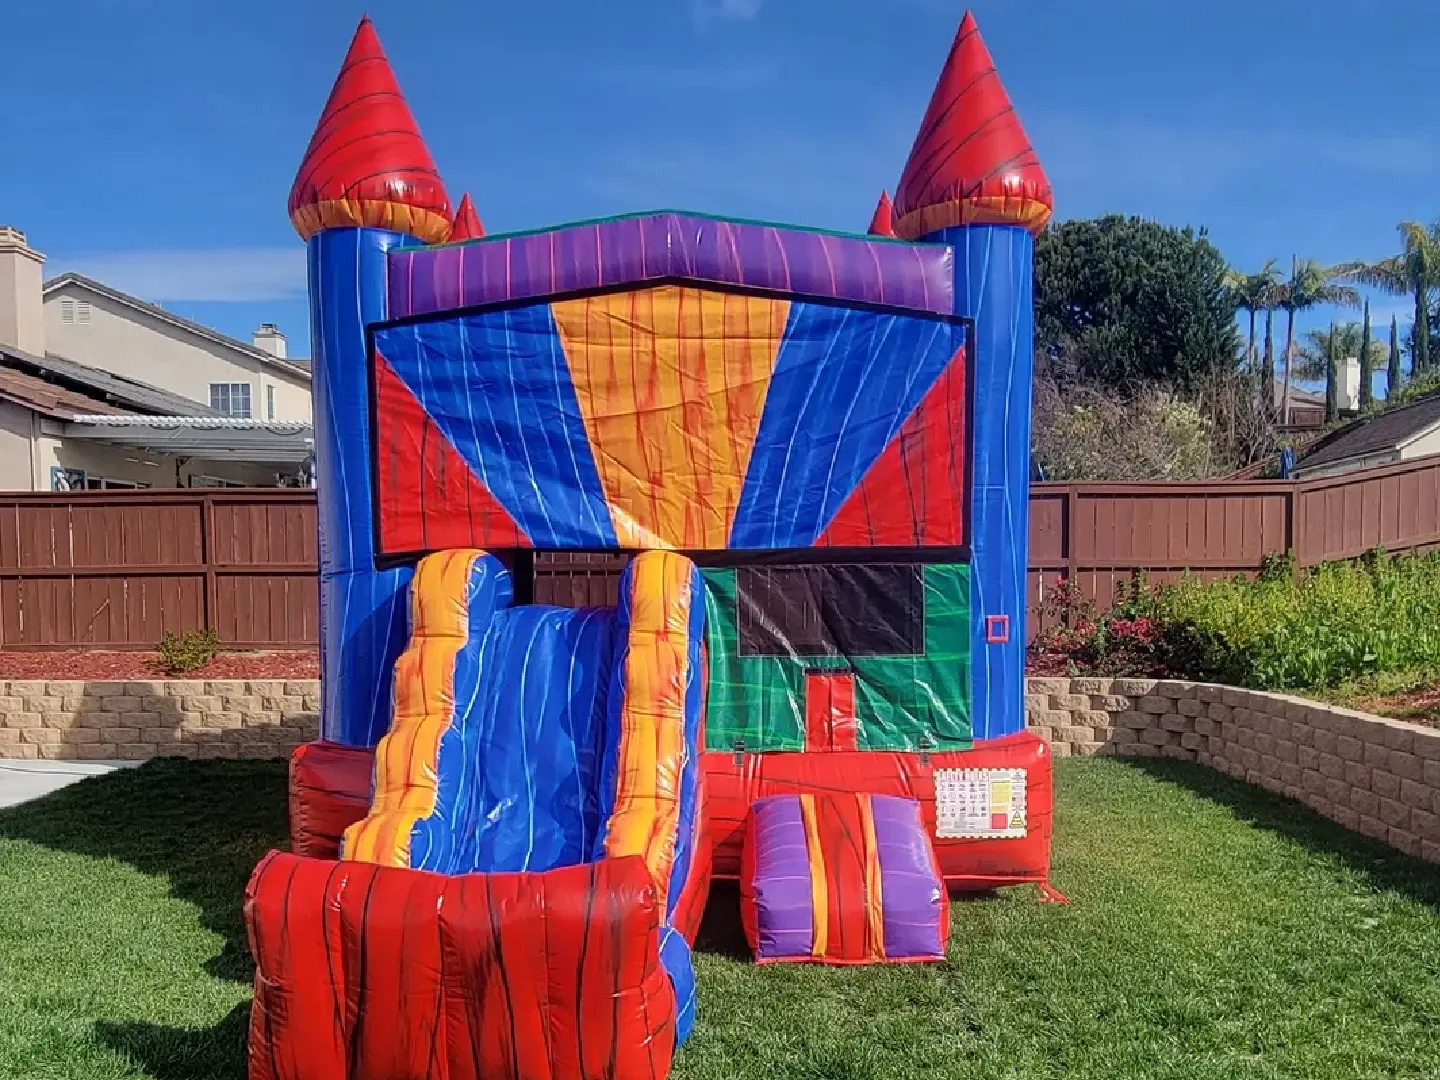 A colorful inflatable castle with slide in the yard.